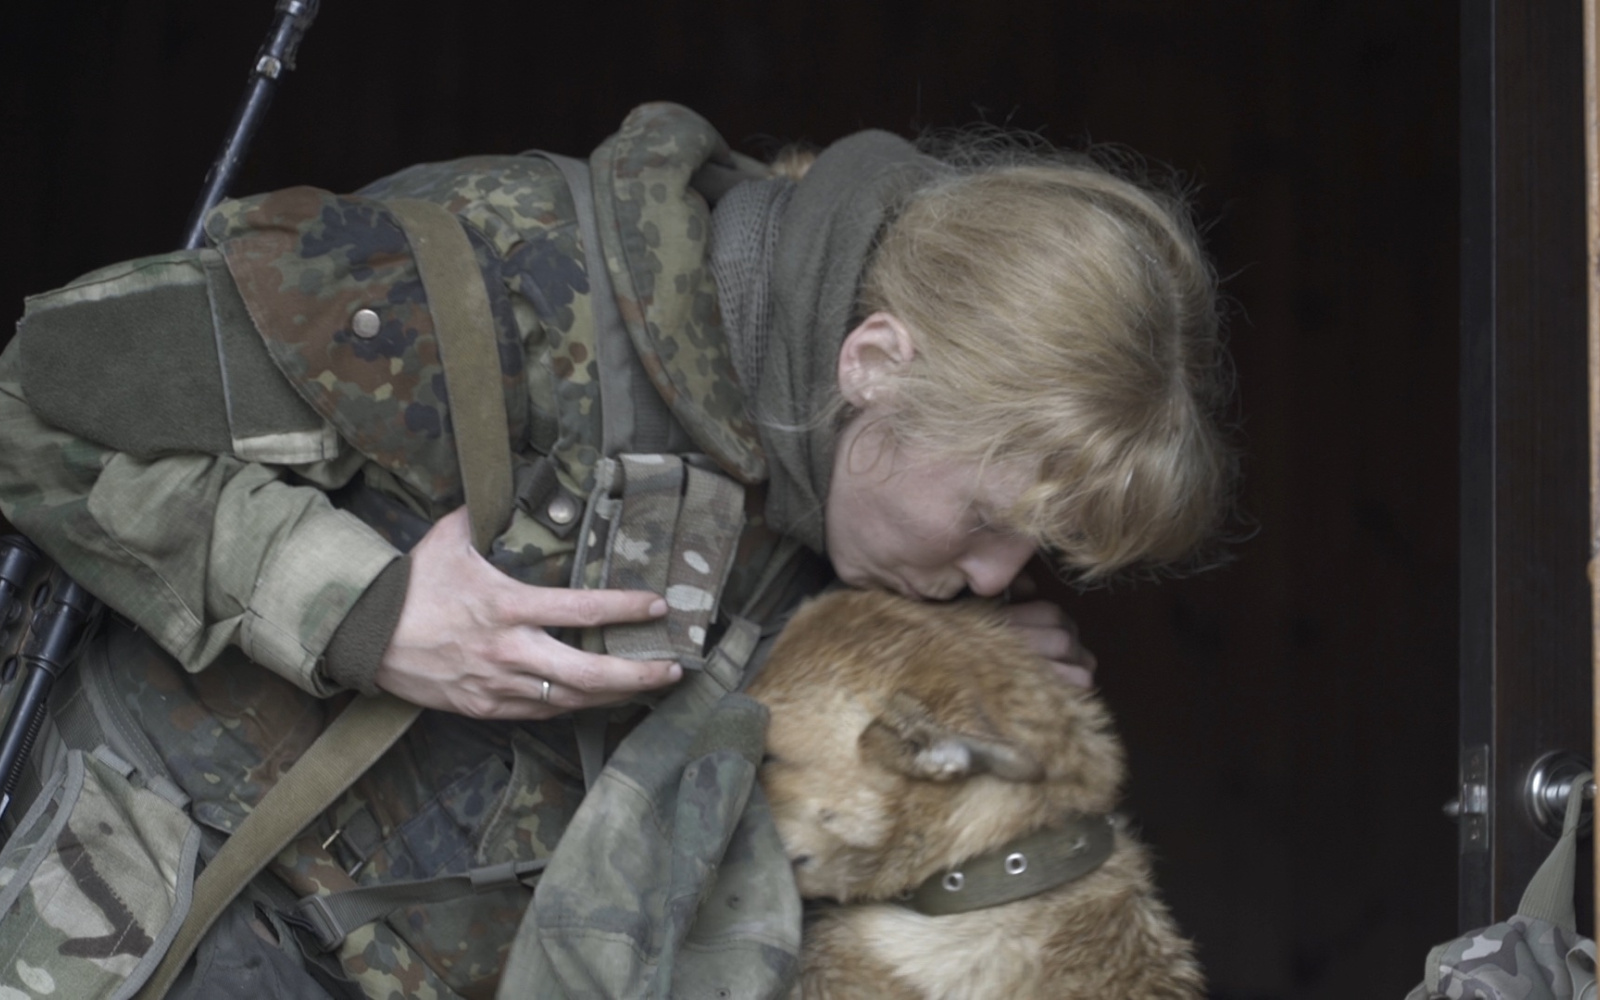 The picture shows a woman in camouflage colors caressing her dog.